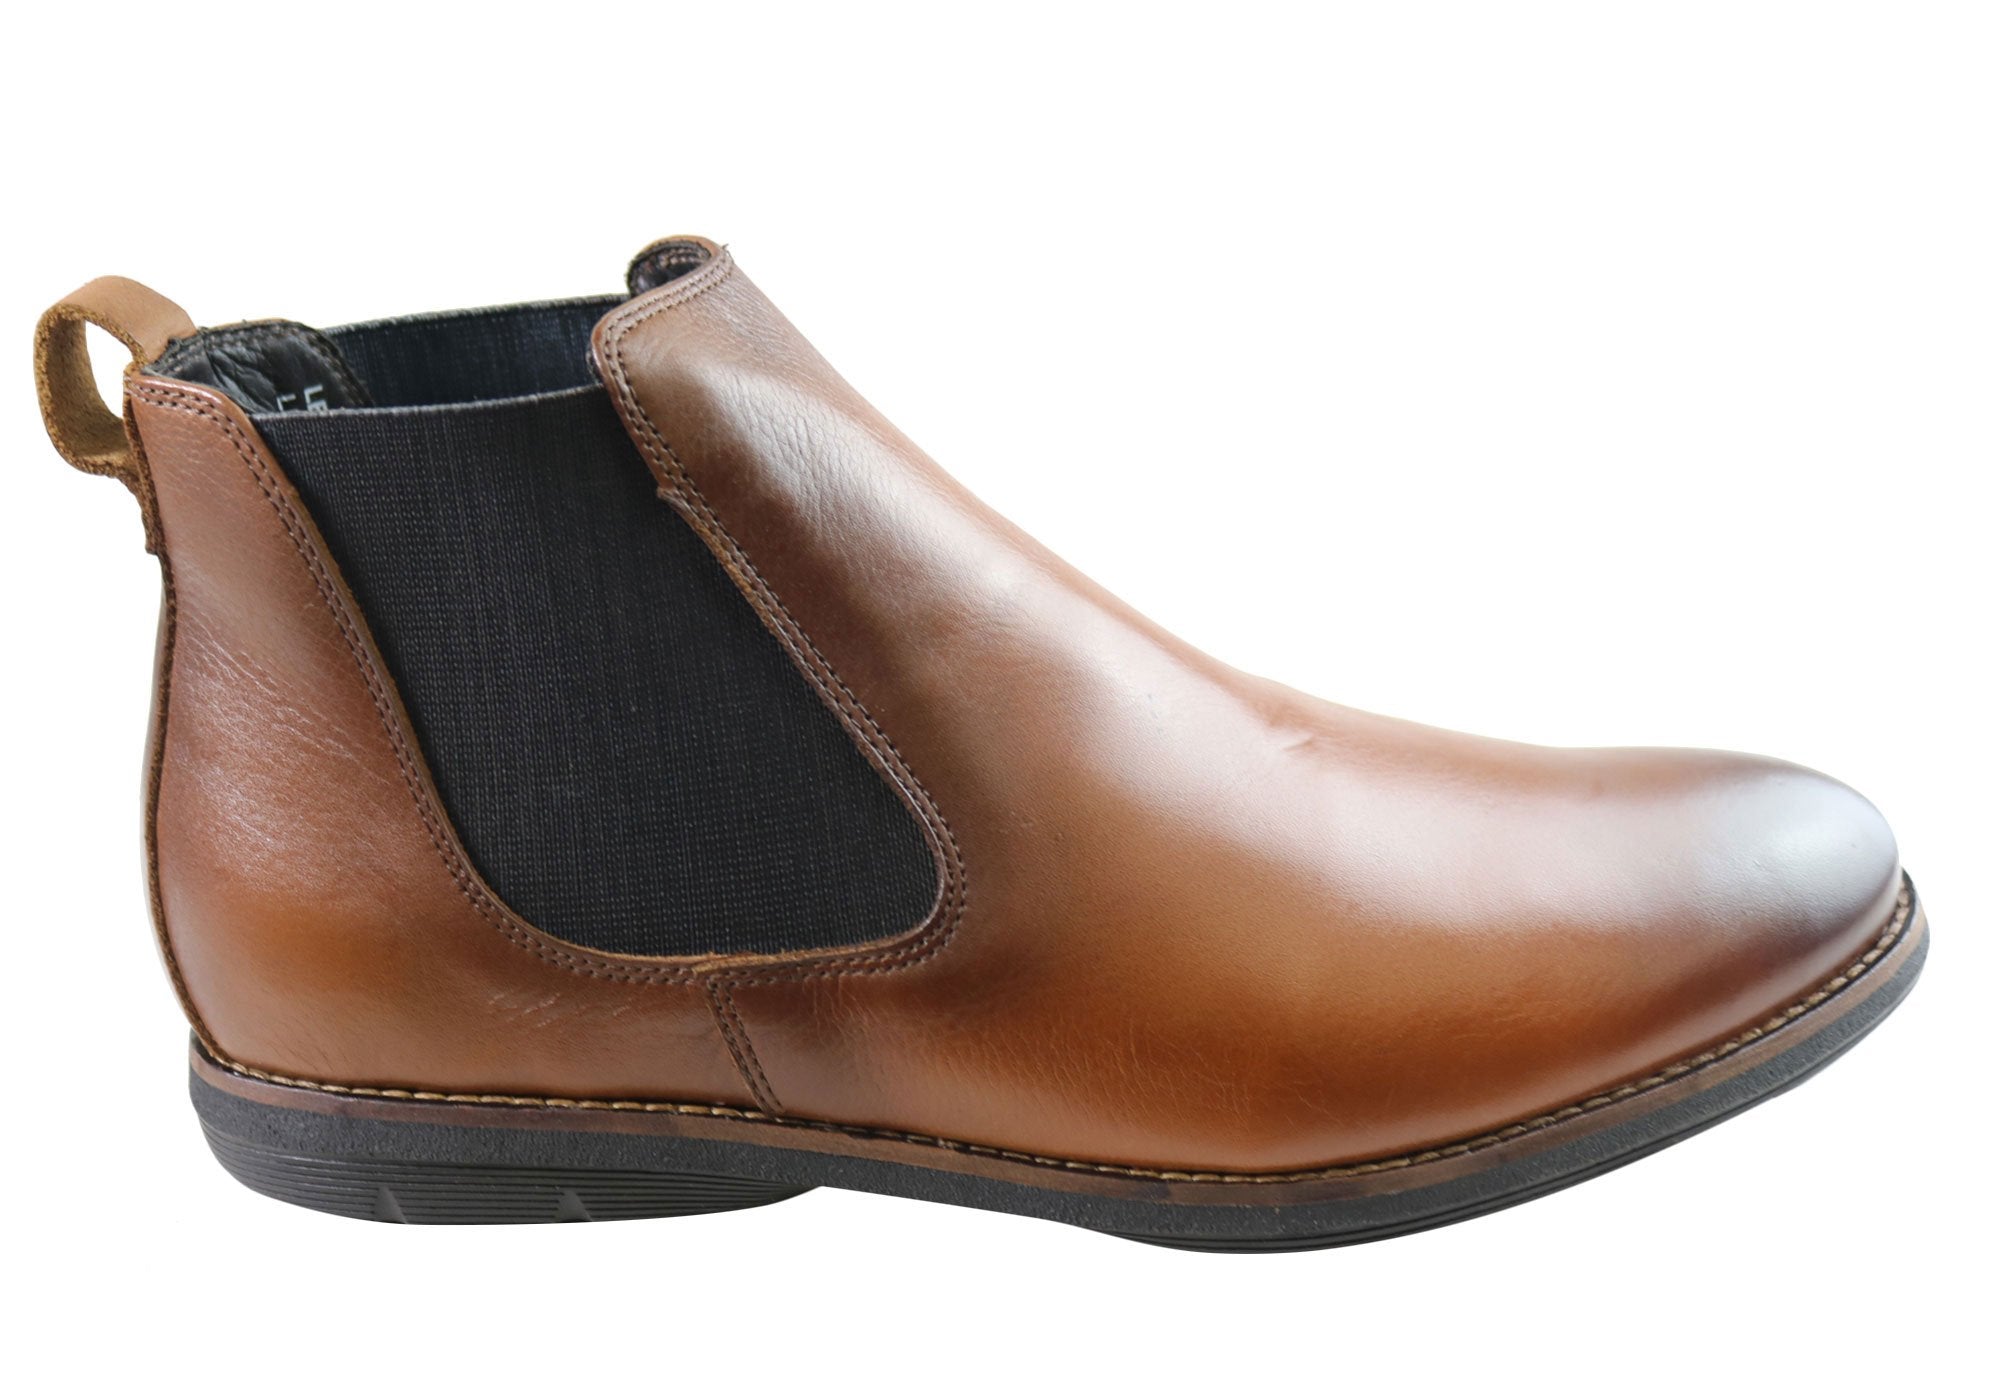 8 Men’s Boots for Any Occasion